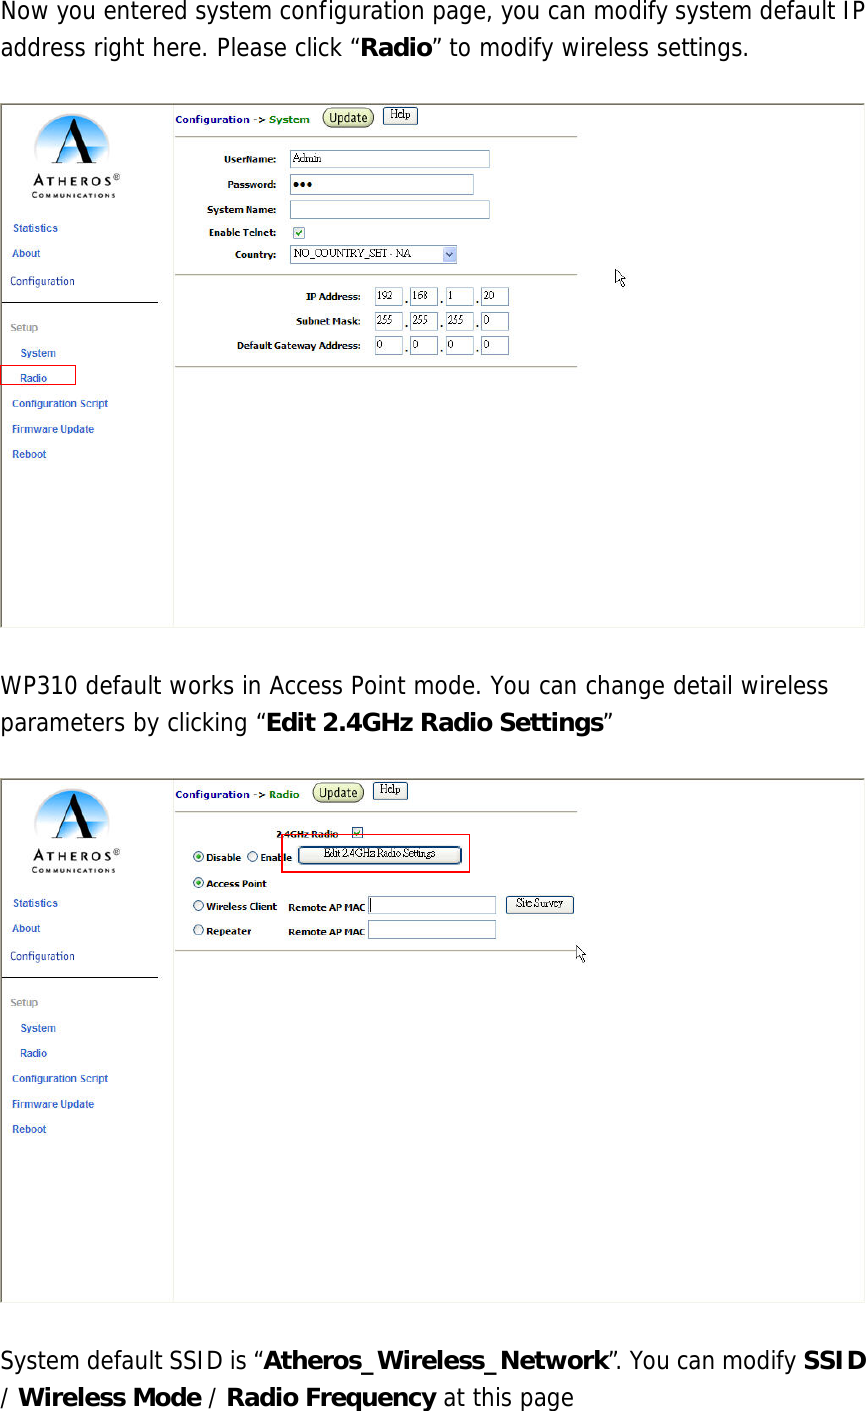  Now you entered system configuration page, you can modify system default IP address right here. Please click “Radio” to modify wireless settings.    WP310 default works in Access Point mode. You can change detail wireless parameters by clicking “Edit 2.4GHz Radio Settings”    System default SSID is “Atheros_Wireless_Network”. You can modify SSID / Wireless Mode / Radio Frequency at this page 